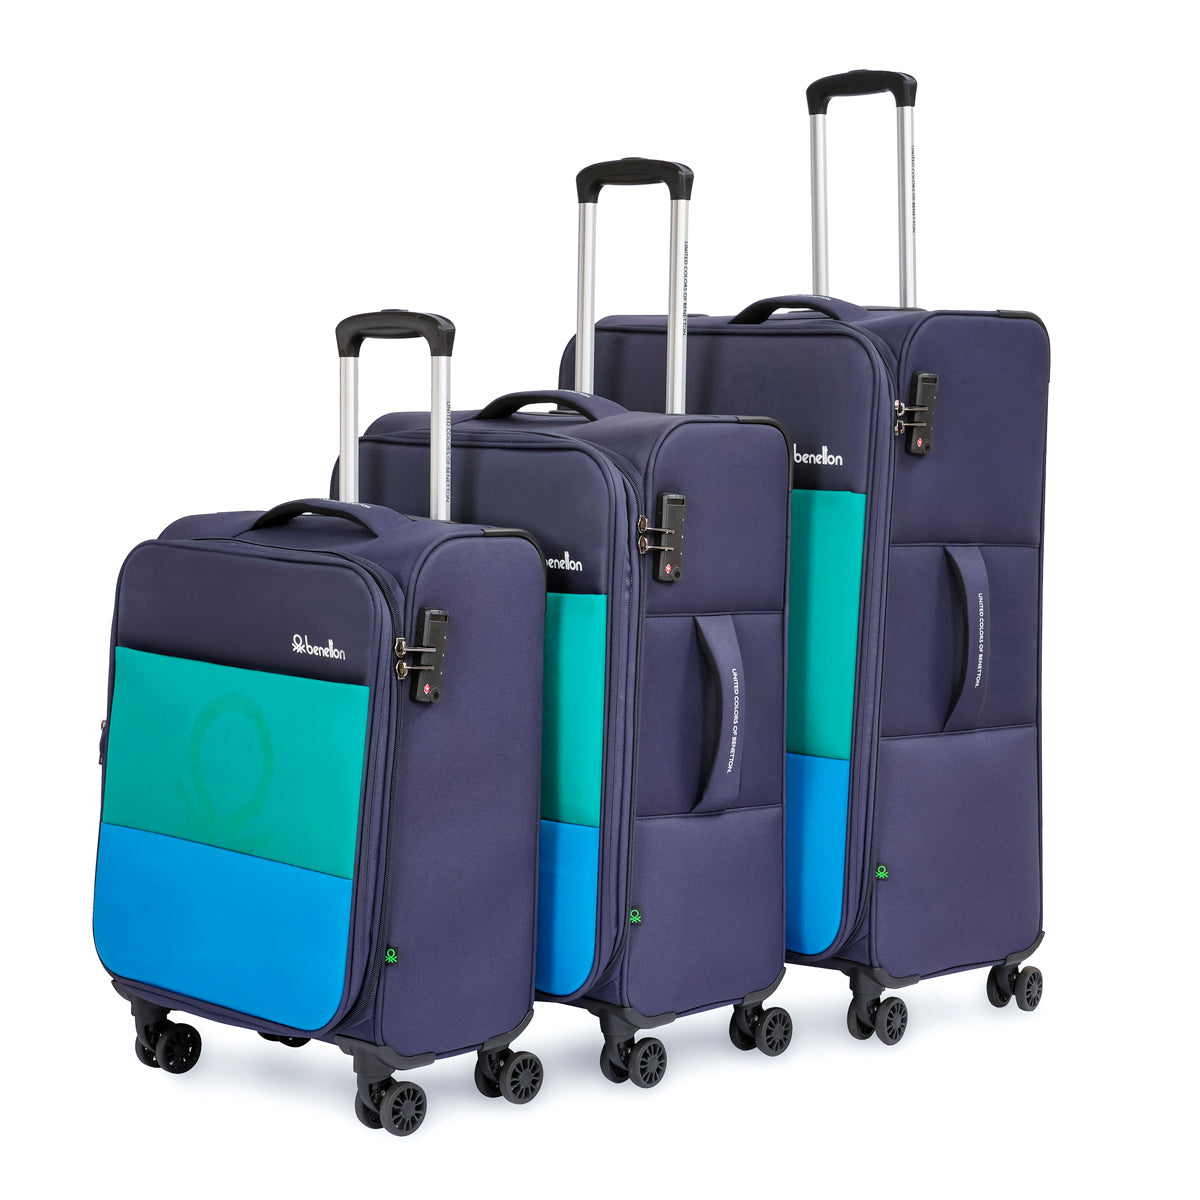 United Colors of Benetton Archimedes Soft Luggage Green Mid